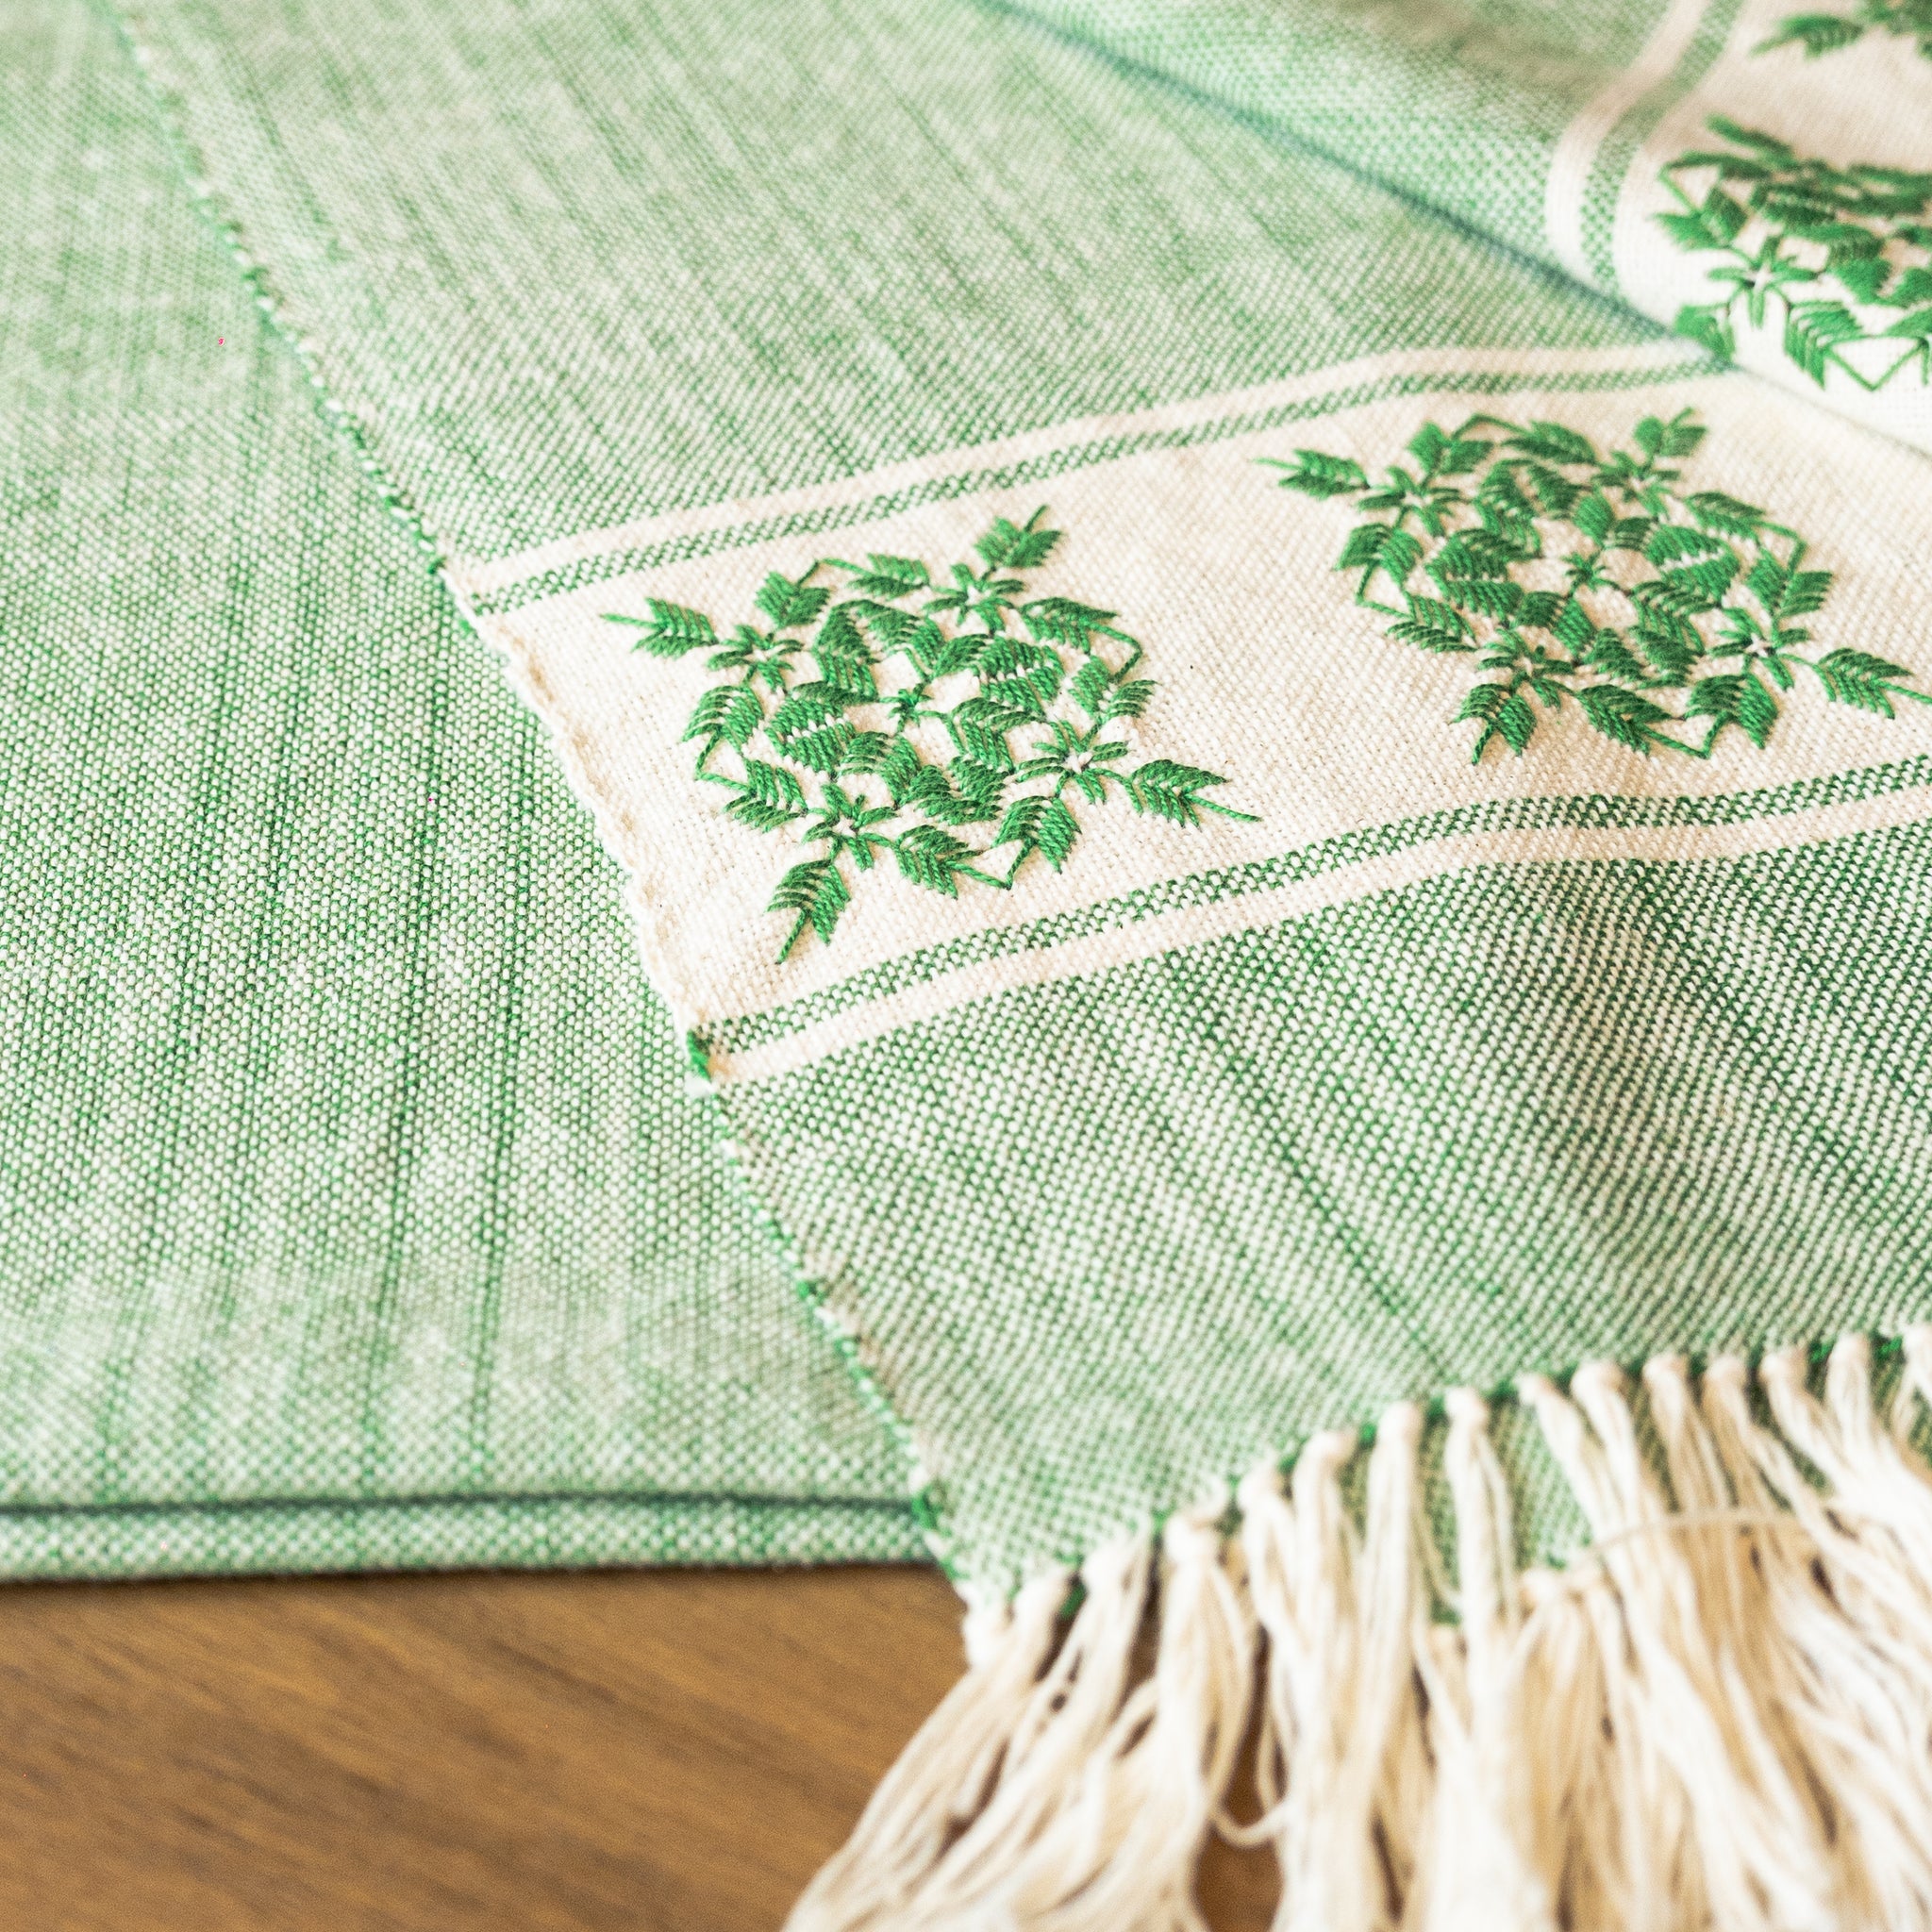 ROAD IN AUTHENTIC AO PO'I FABRIC EMBROIDERED ¨CLOVER¨ - G